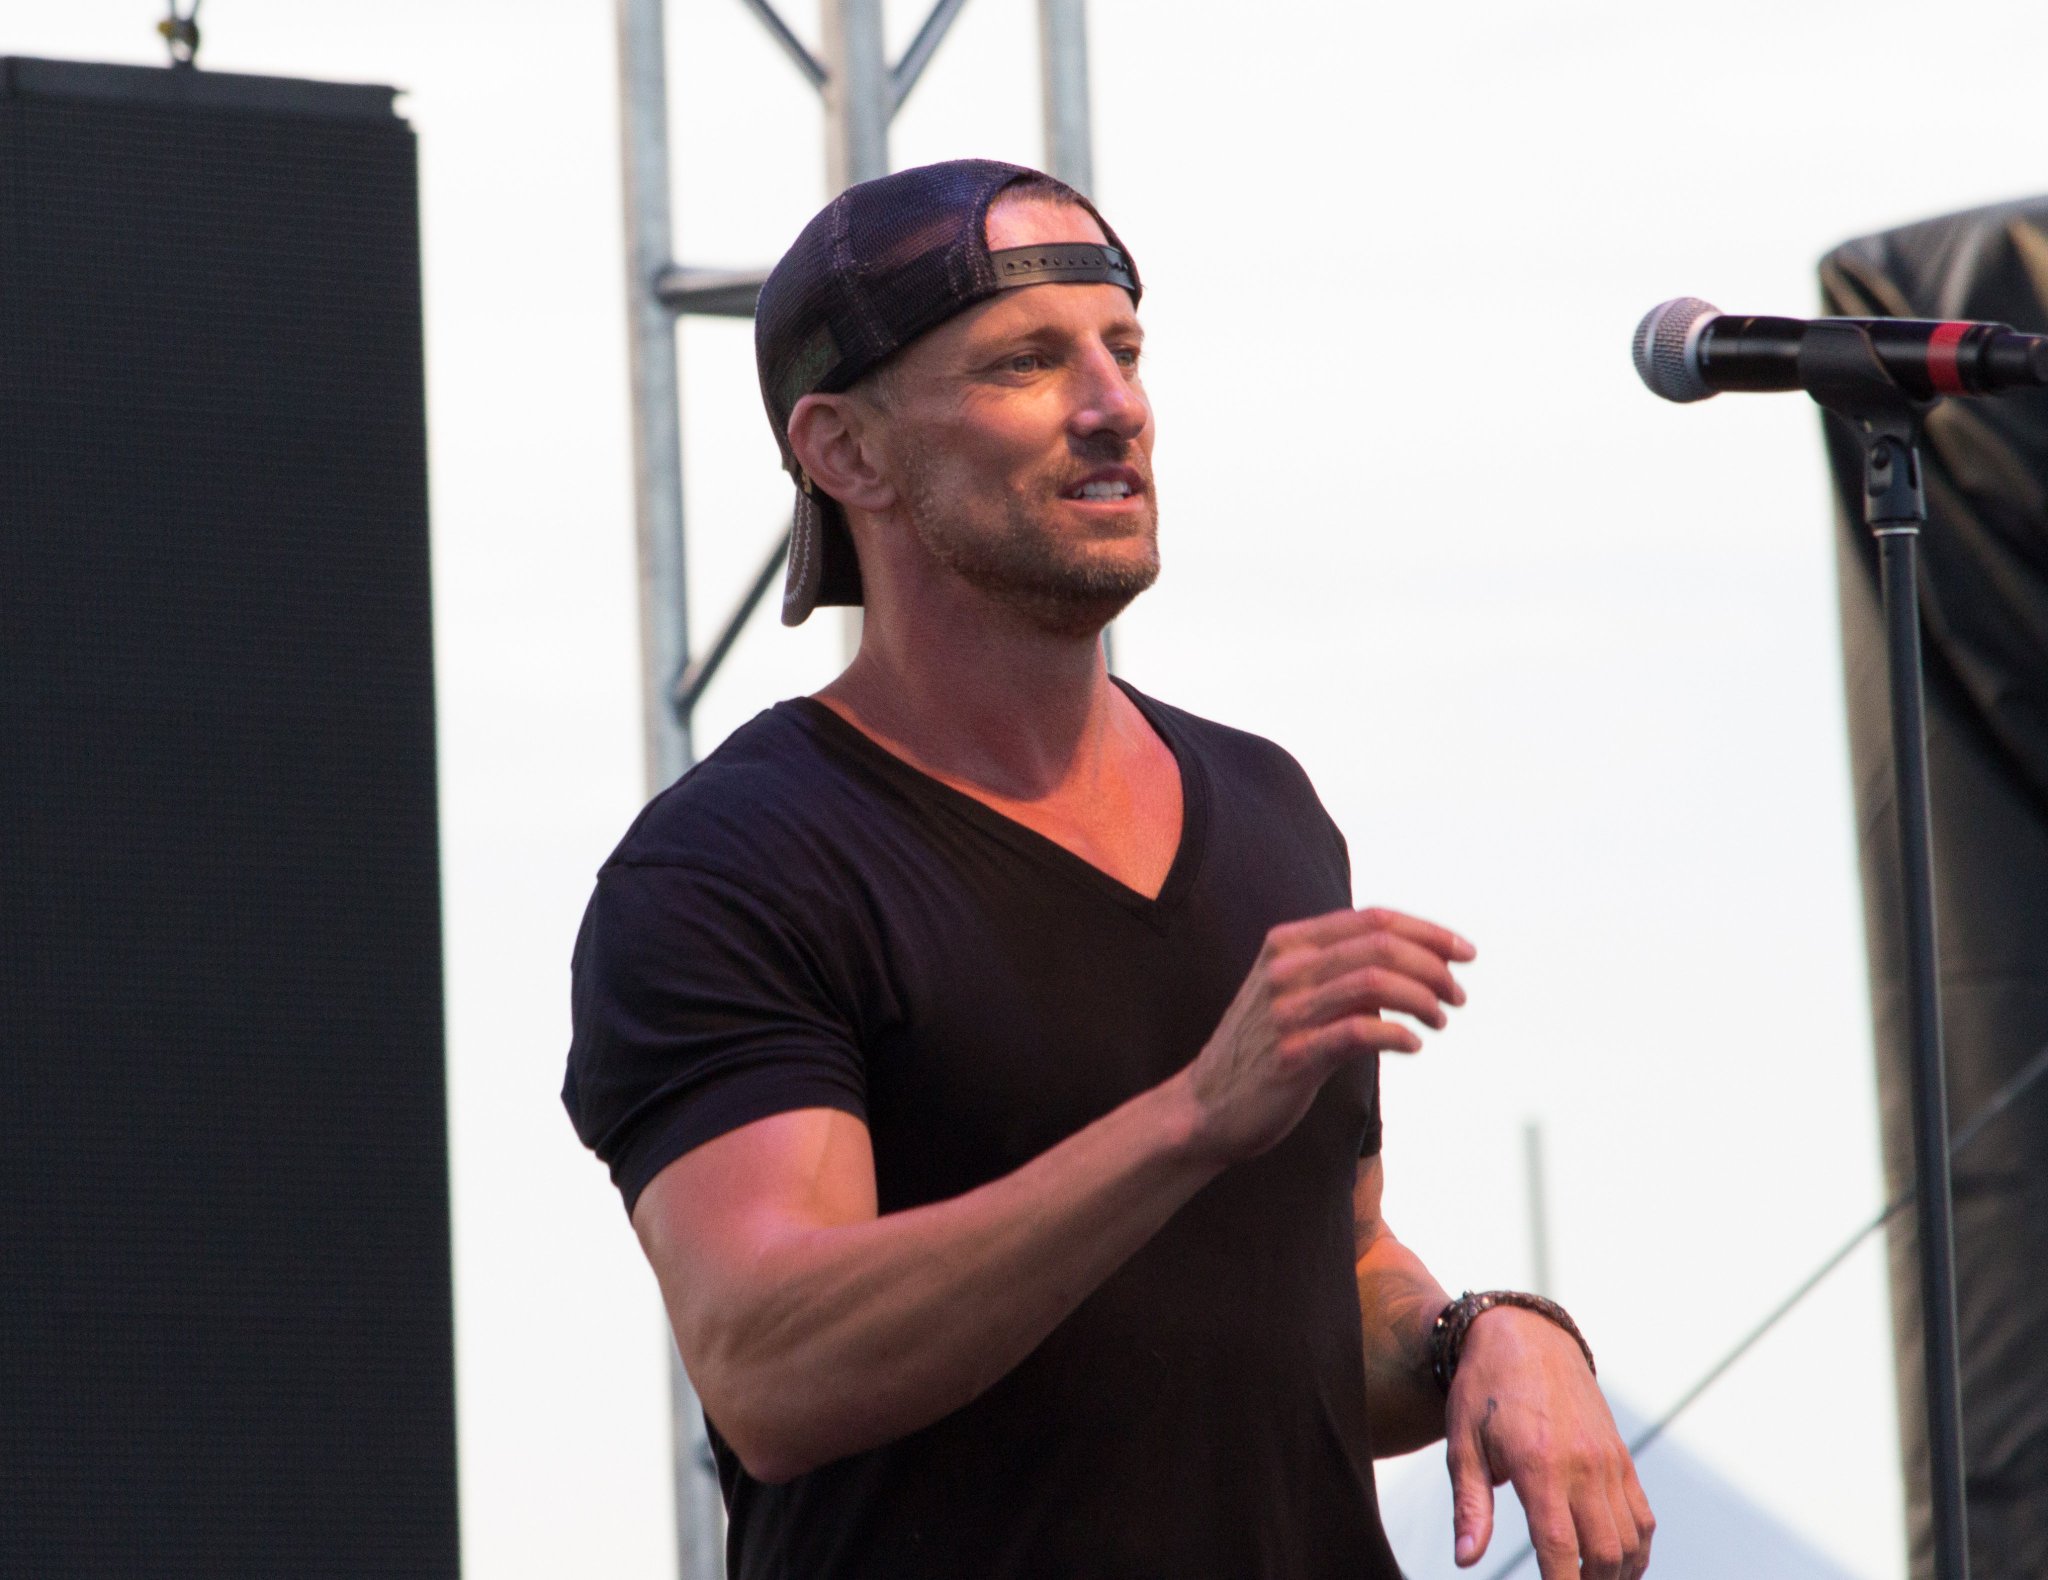 Please join me here at in wishing the one and only Daniel Powter a very Happy 50th Birthday today  